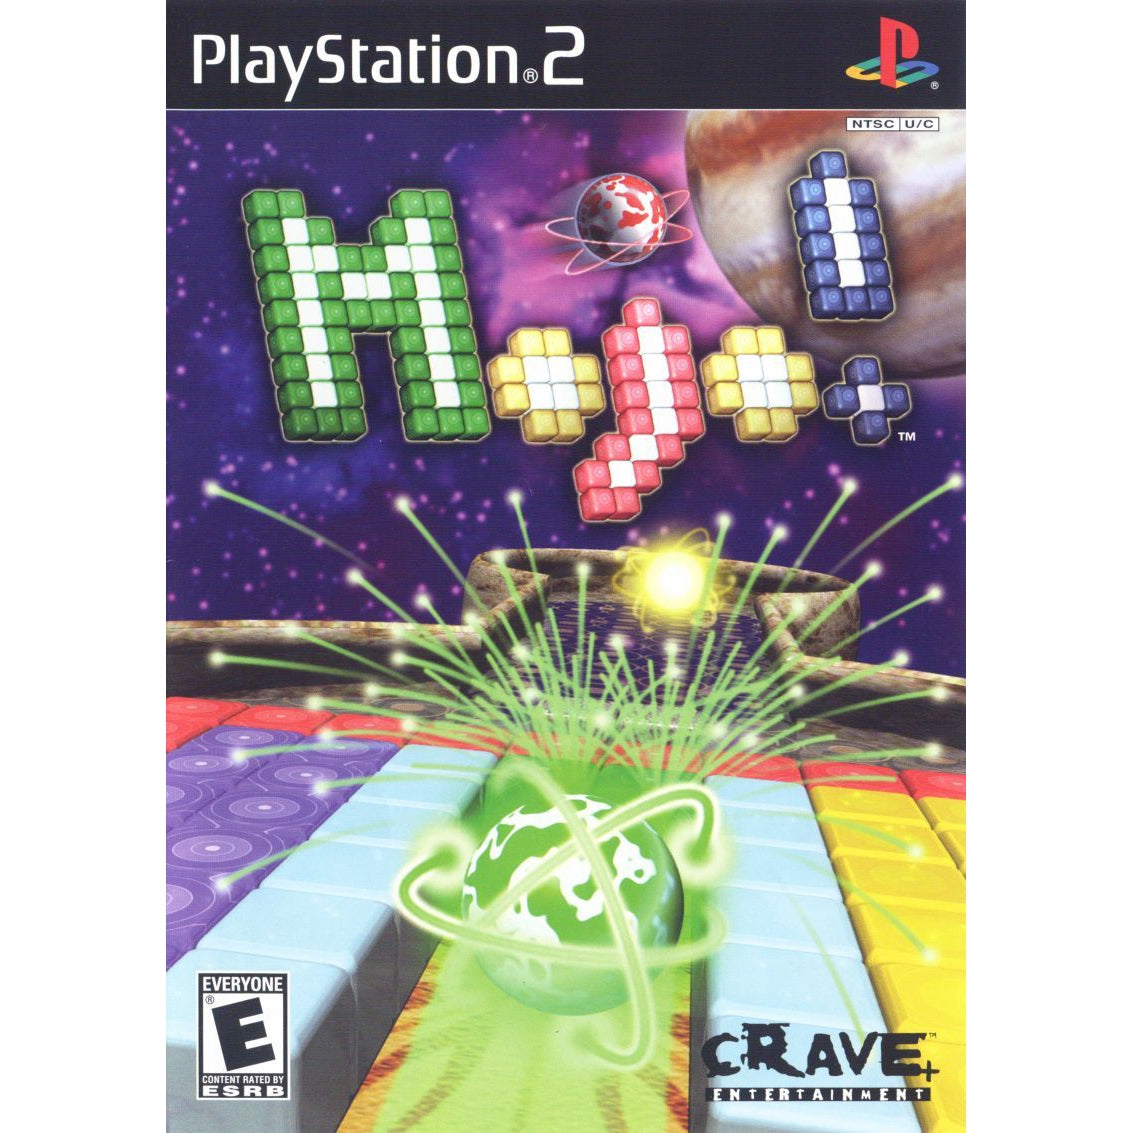 Mojo! - PlayStation 2 (PS2) Game Complete - YourGamingShop.com - Buy, Sell, Trade Video Games Online. 120 Day Warranty. Satisfaction Guaranteed.